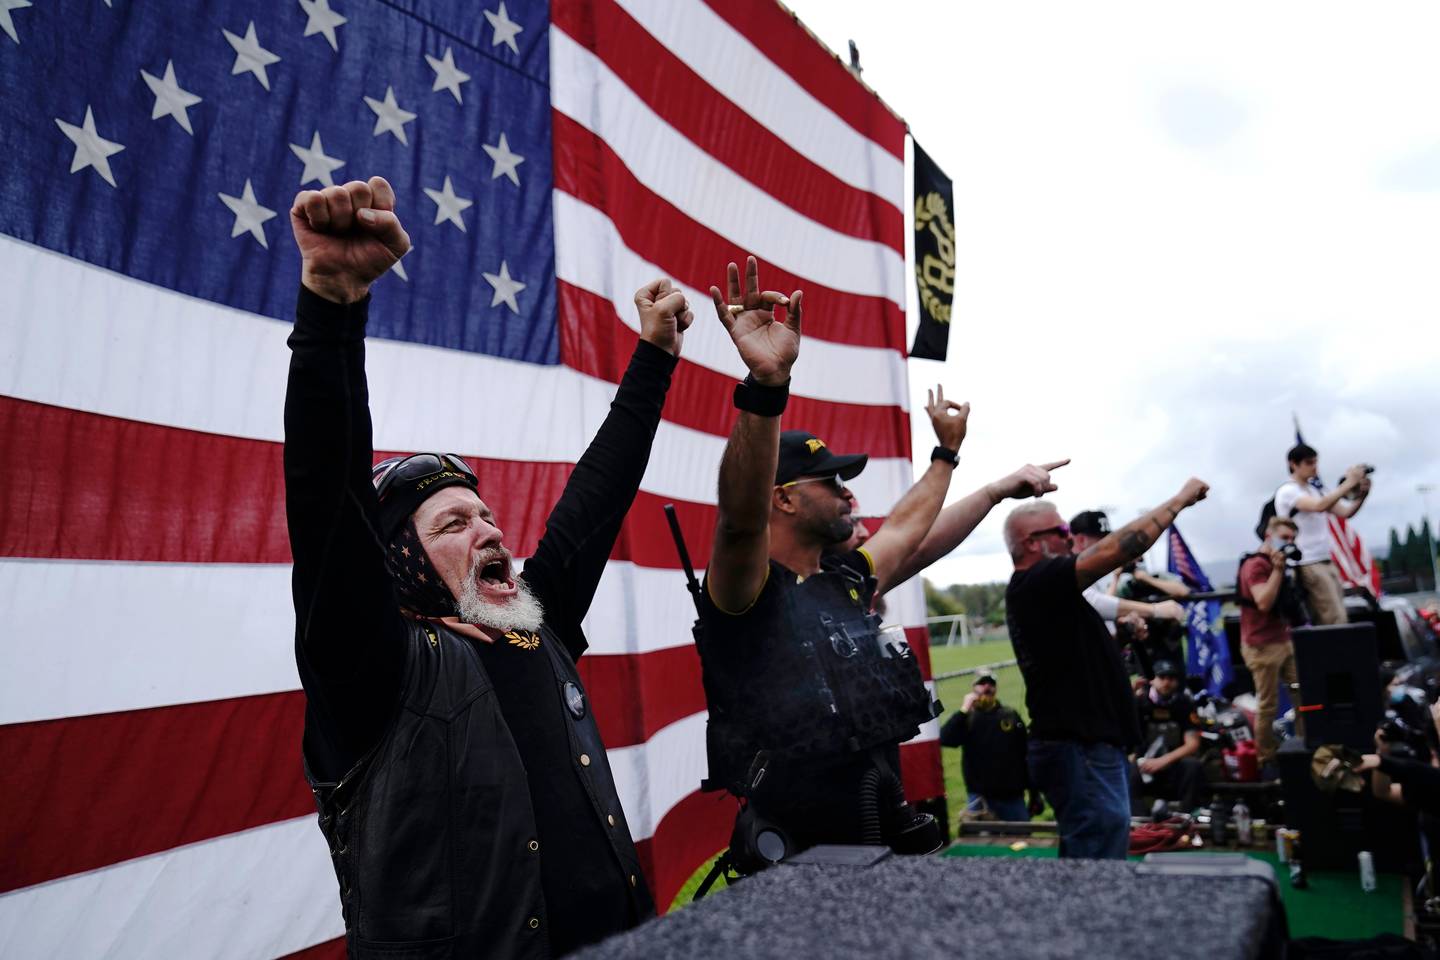 FILE - In this Sept. 26, 2020 file photo, members of the Proud Boys, including leader Enrique Tarrio, second from left, gesture and cheer on stage as they and other right-wing demonstrators rally in Portland, Ore. President Donald Trump didn't condemn white supremacist groups and their role in violence in some American cities this summer. Instead, he said the violence is a left-wing" problem and he told one far-right extremist group to stand back and stand by. His comments Tuesday night were in response to debate moderator Chris Wallace asking if he would condemn white supremacists and militia groups. Trump's exchange with Democrat Joe Biden left the extremist group Proud Boys celebrating what some of its members saw as tacit approval. (AP Photo/John Locher)